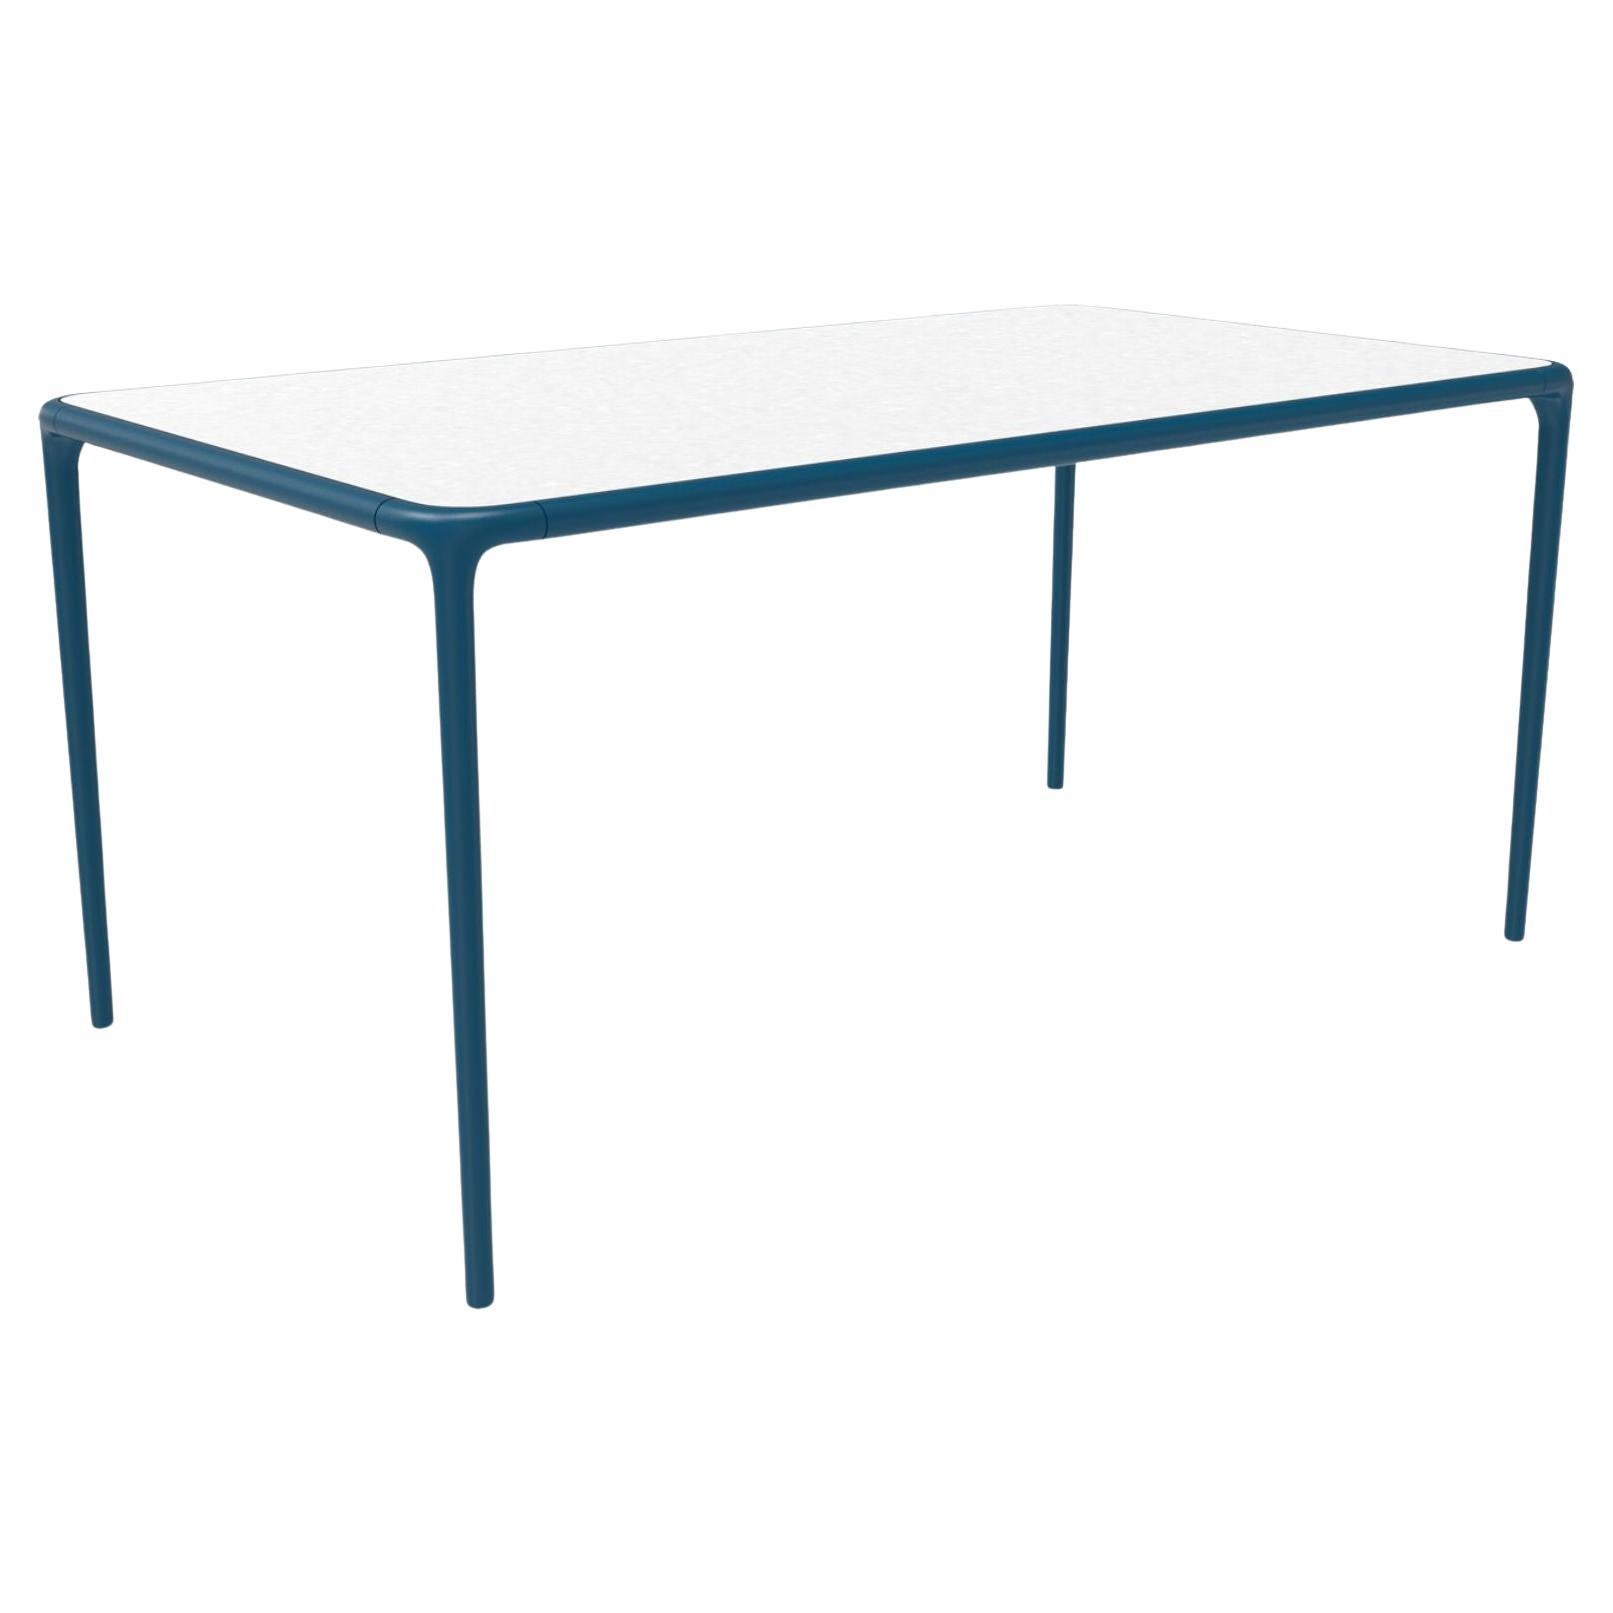 Xaloc Navy Glass Top Table 160 by Mowee For Sale